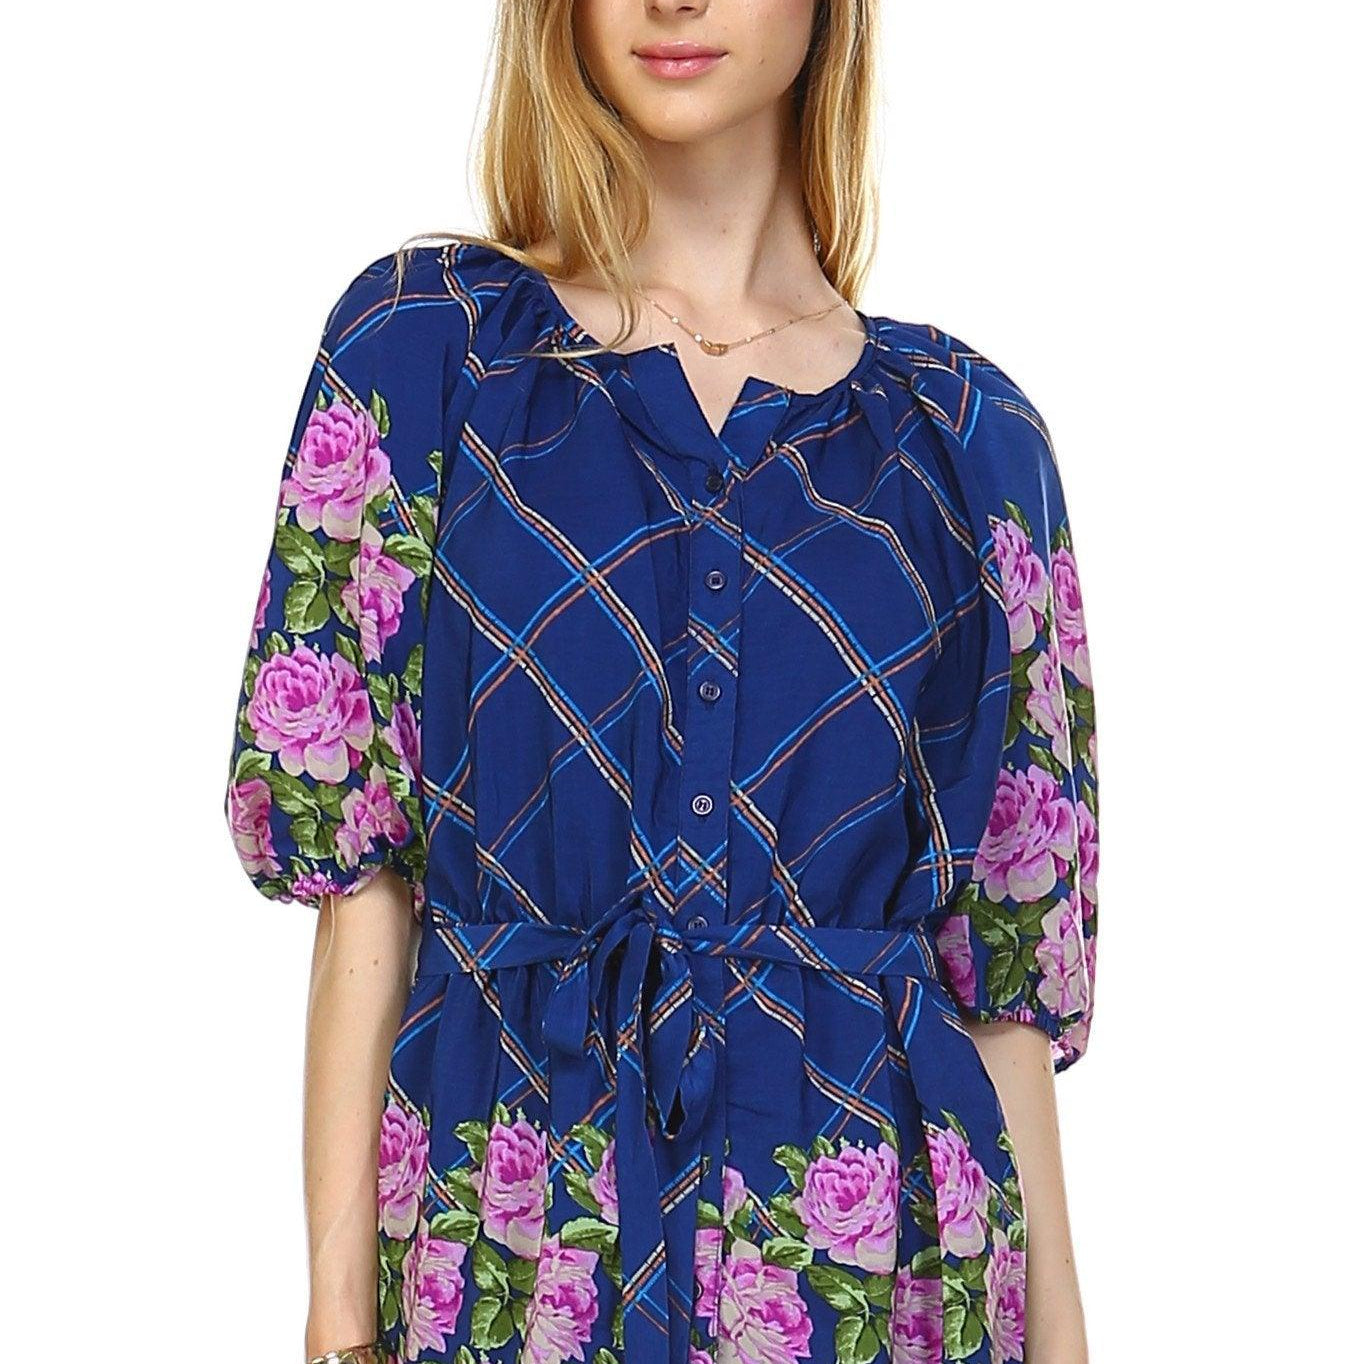 Women's Shirts Women's Belted Button Front Top